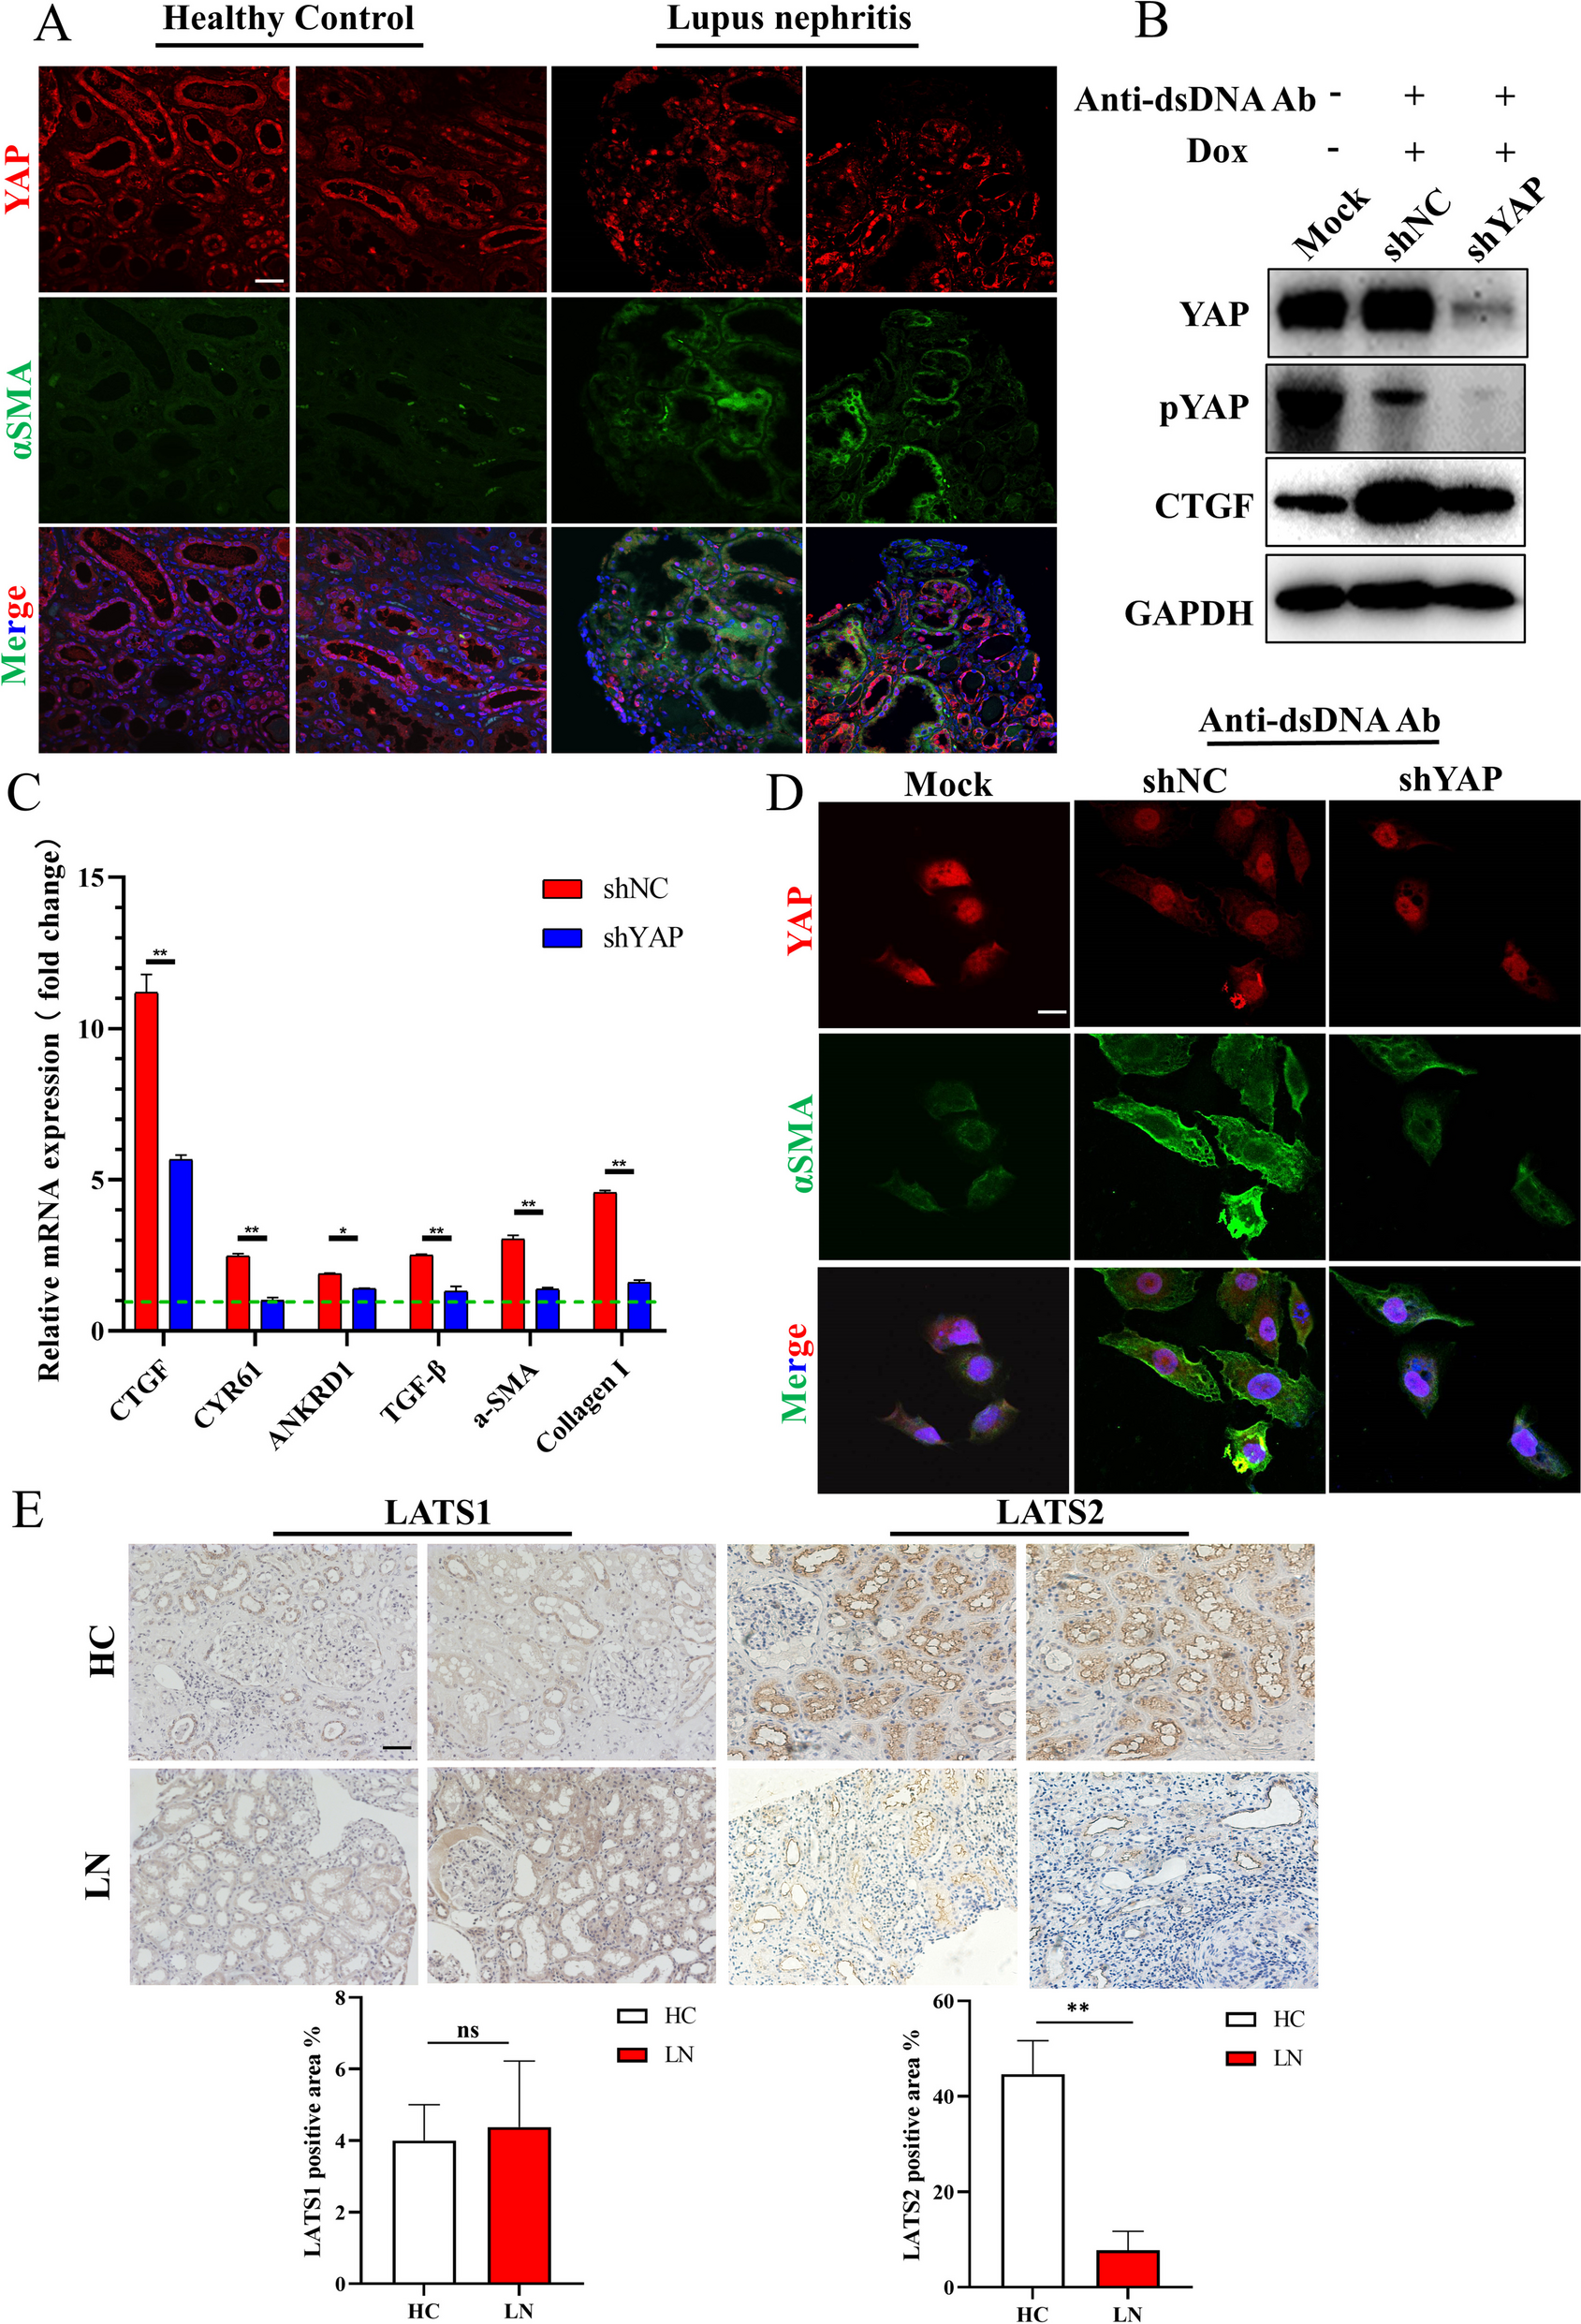 LATS2 degradation promoted fibrosis damage and rescued by vitamin K3 in lupus nephritis